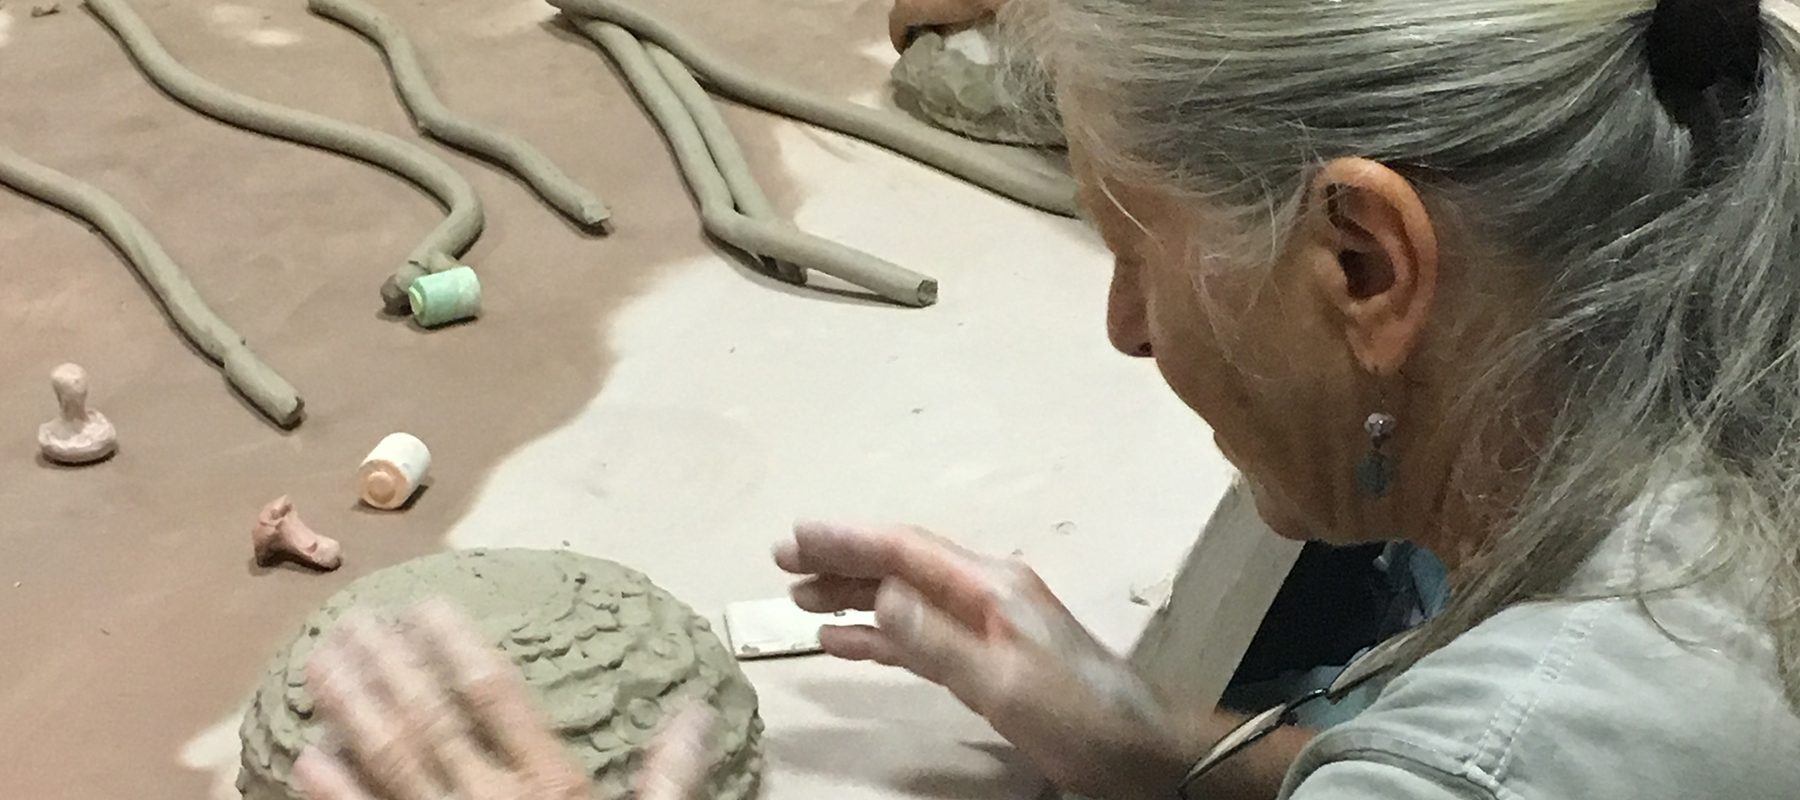 A woman with gray hair creates a bowl using clay.